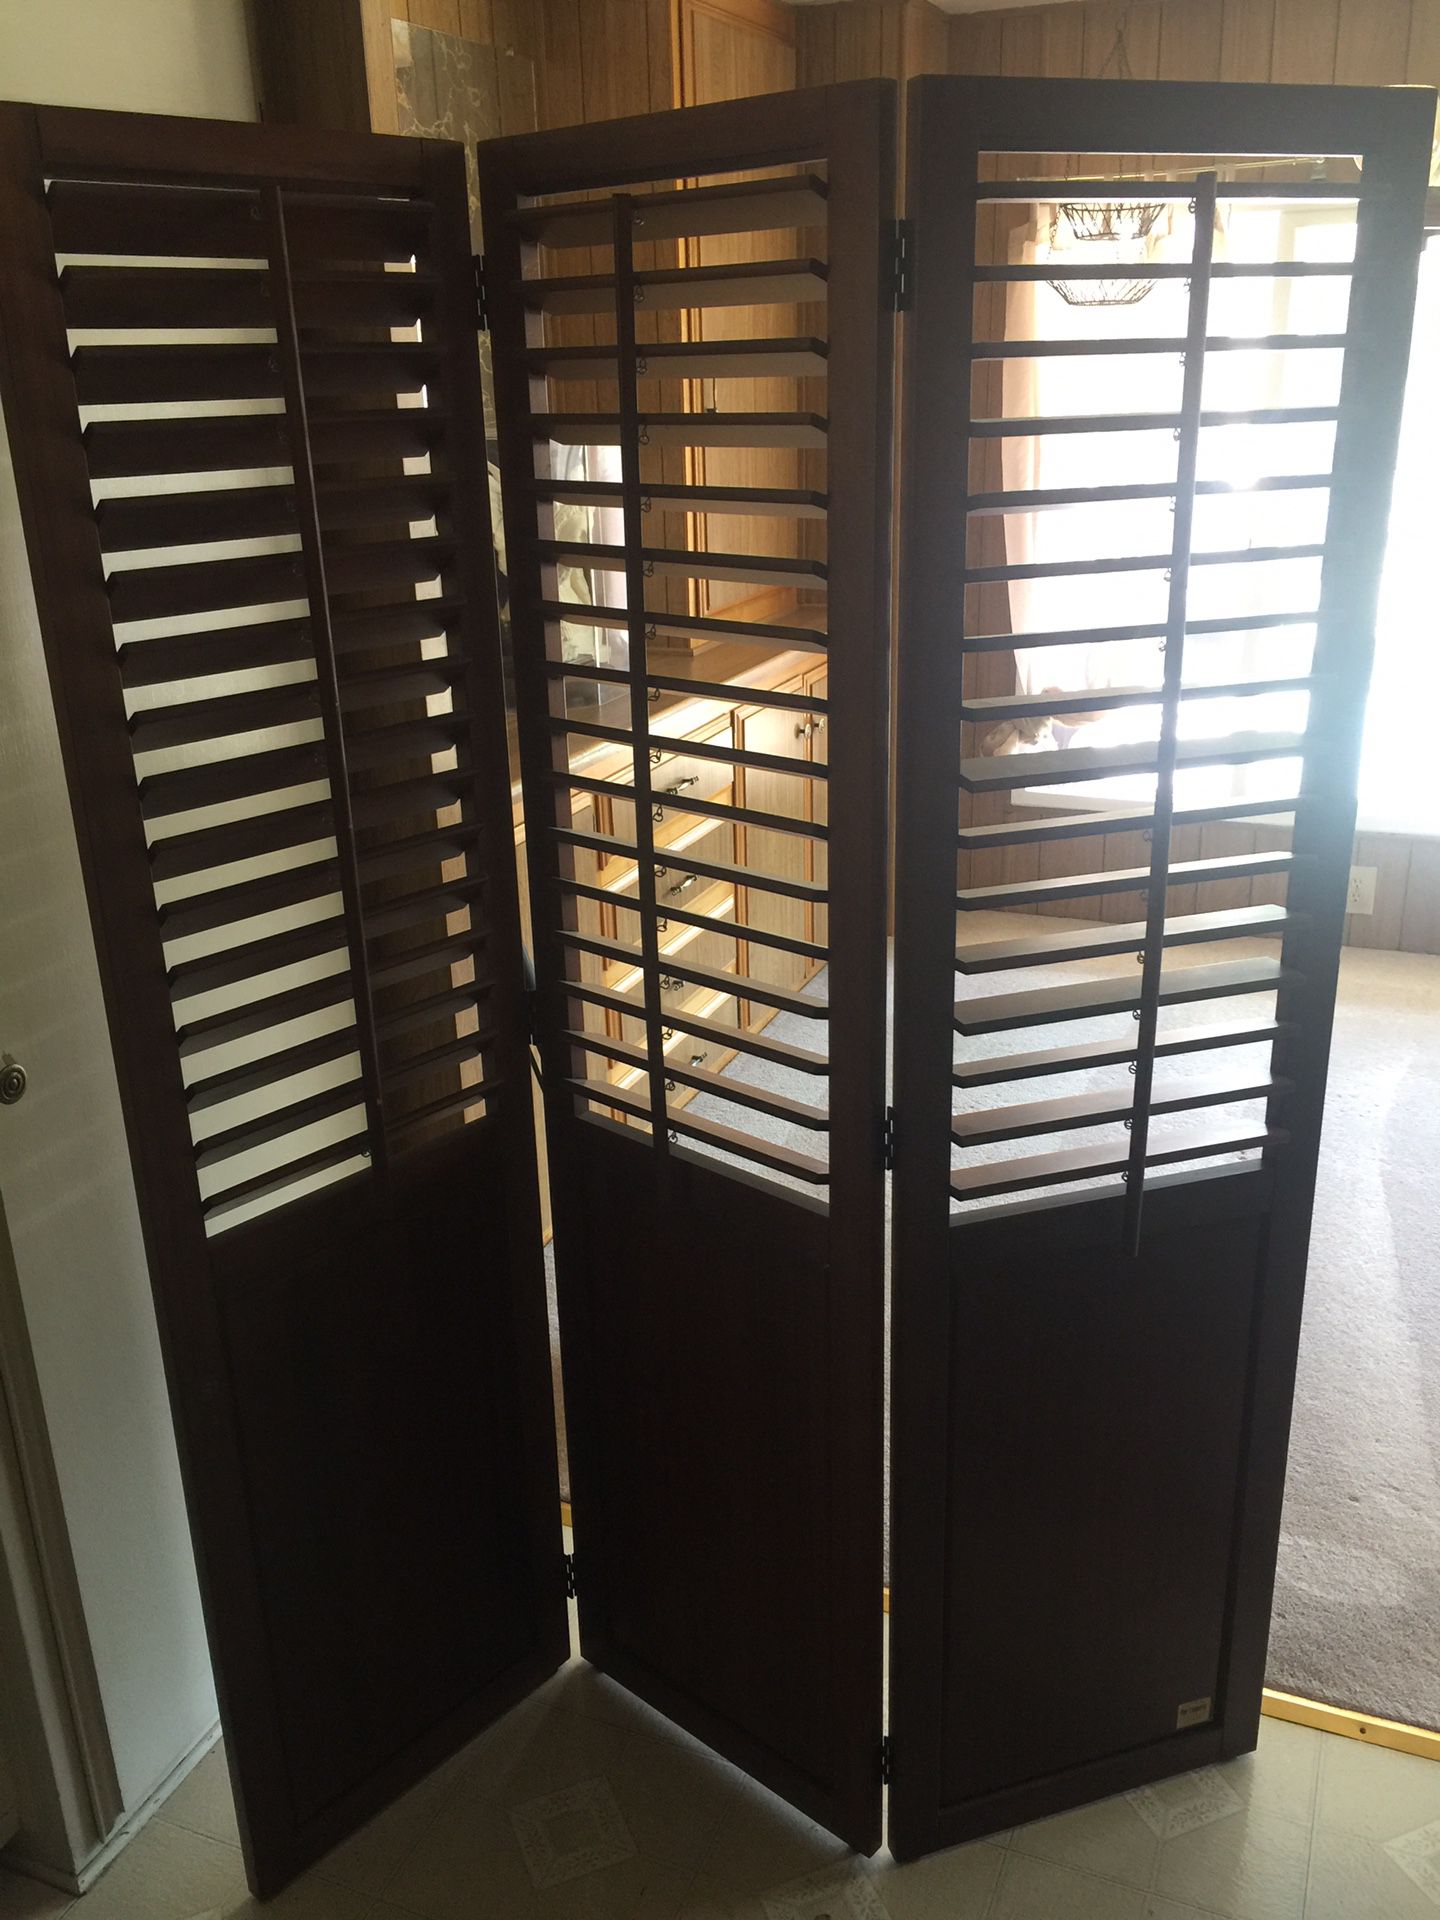 Pier one room divider with opening and closing shutters